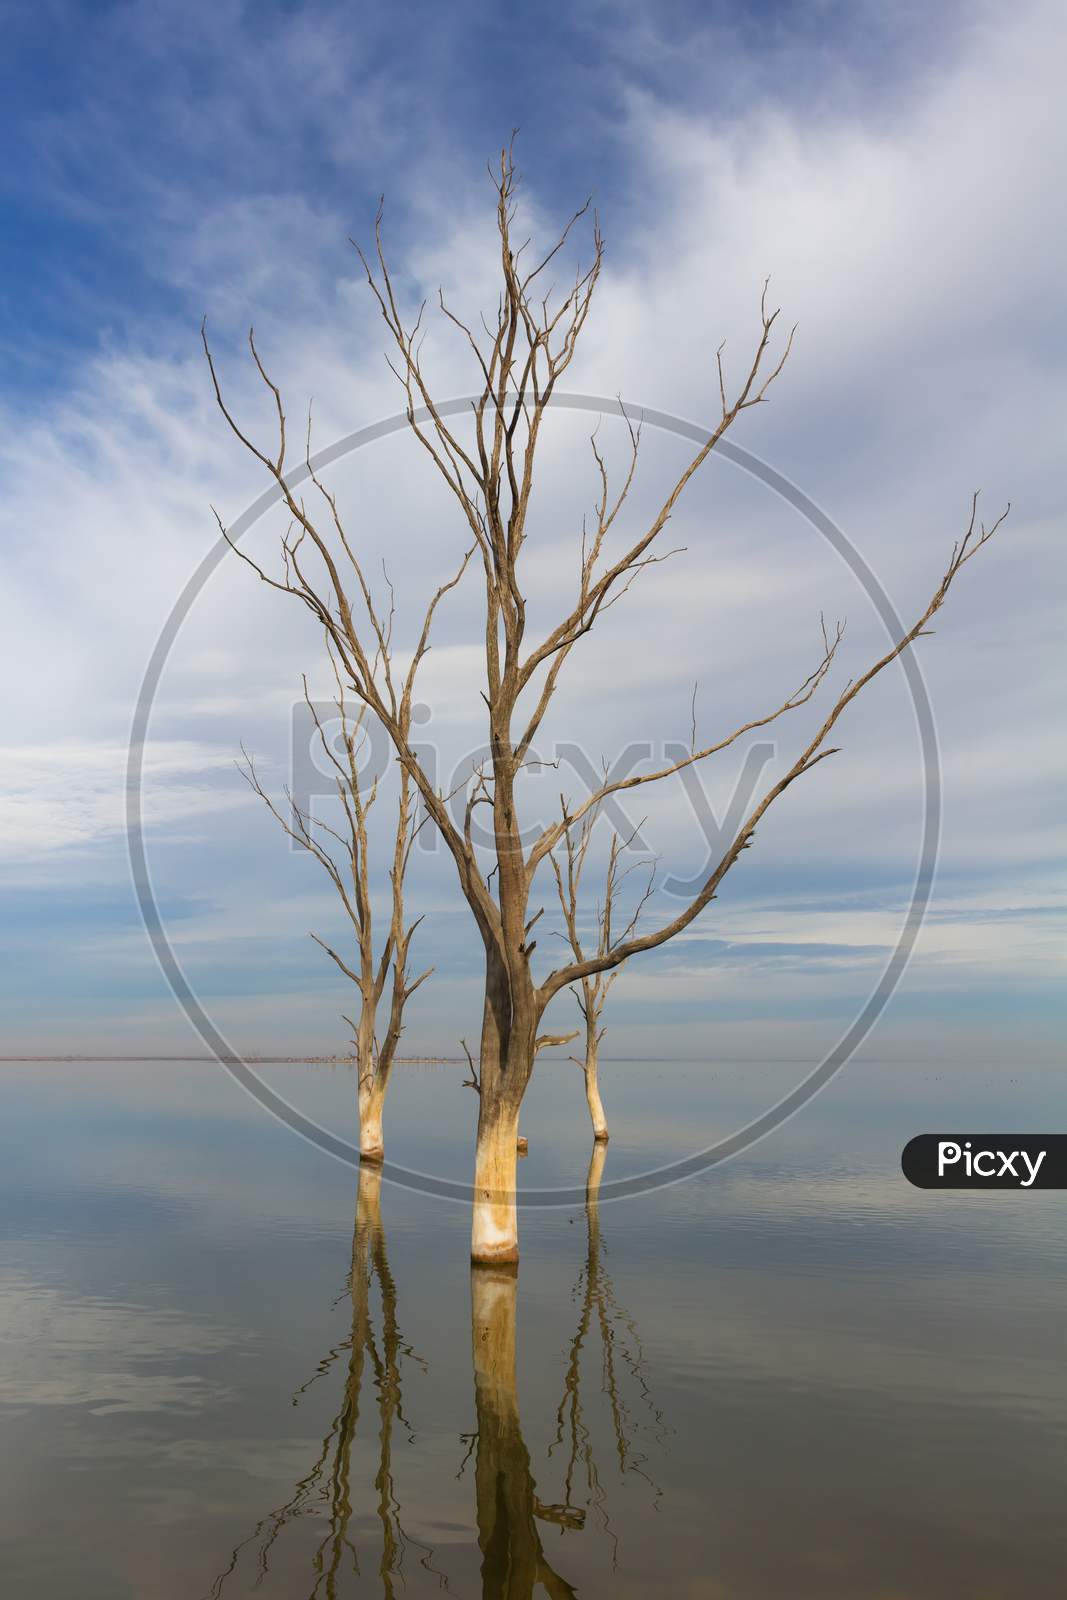 Dry Trees In The City Of Epecuen. Heaven And Water Are Confused On The Horizon. Salt Lake That Caused Devastating Floods.